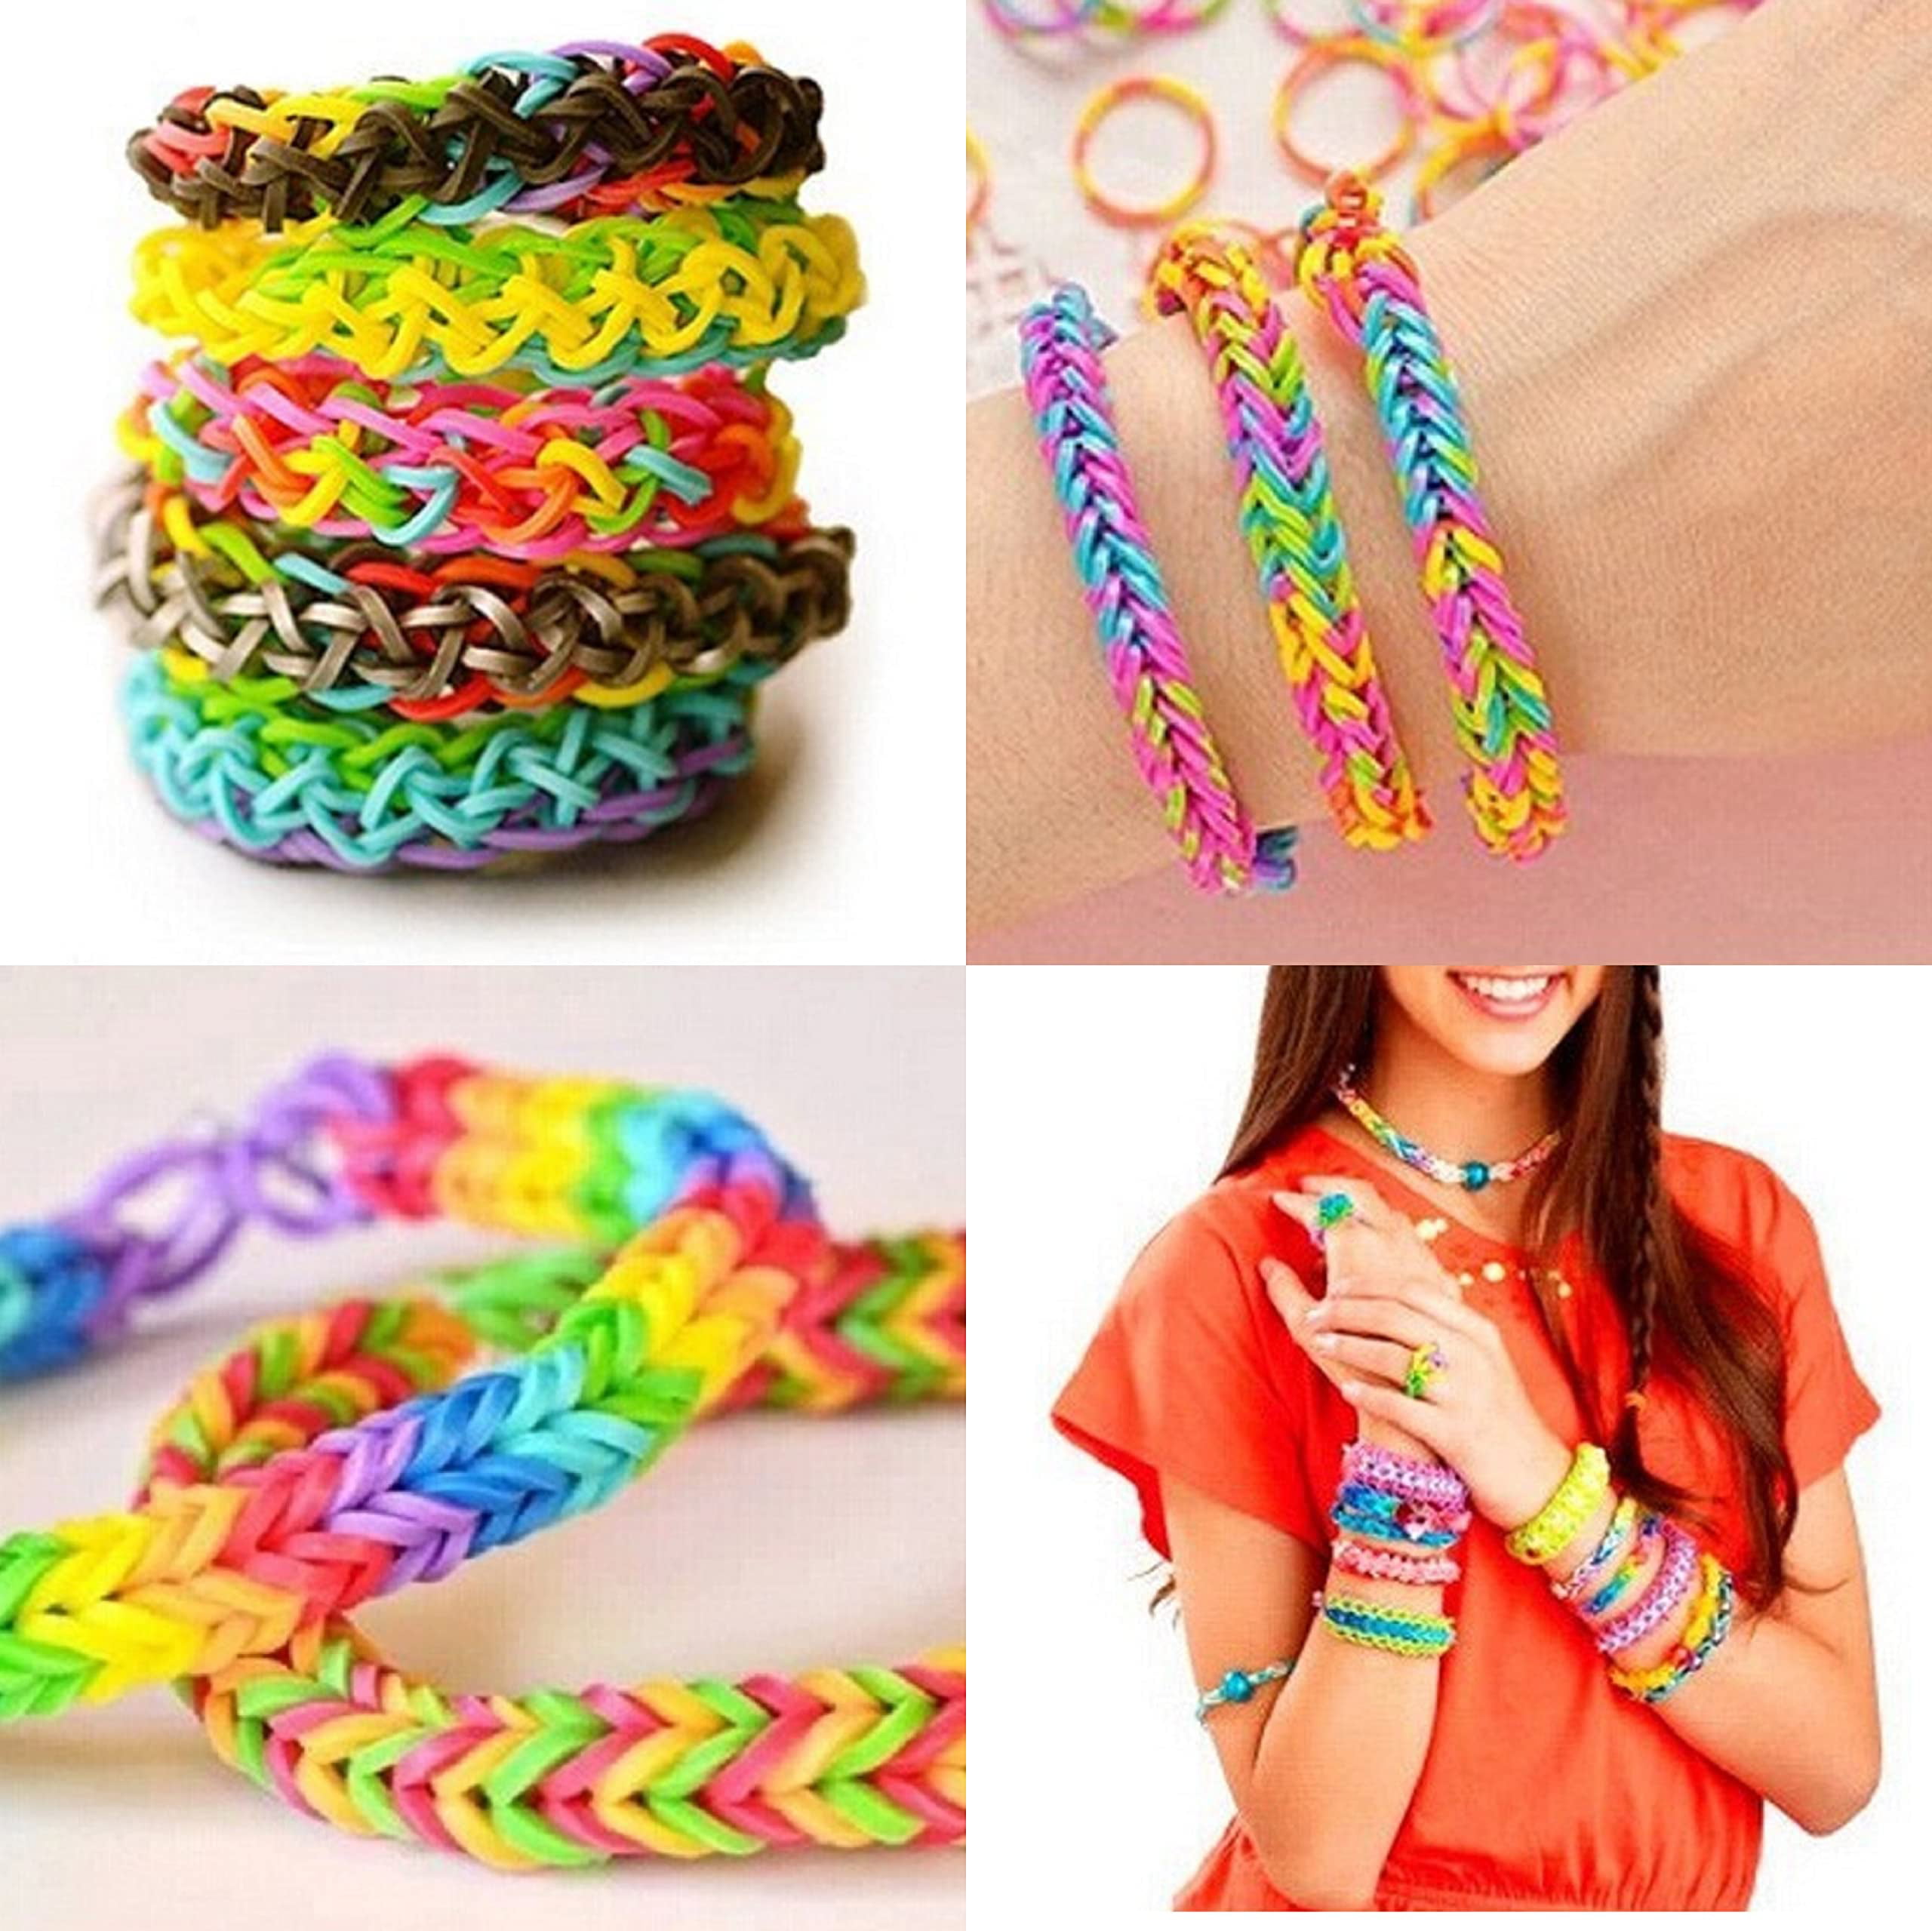 Premium Rubber Bracelet Refill Set Up Loom Bands Toys In 32 Variety Colors  For Kids Boys And Girls From Sxe_toys, $6.74